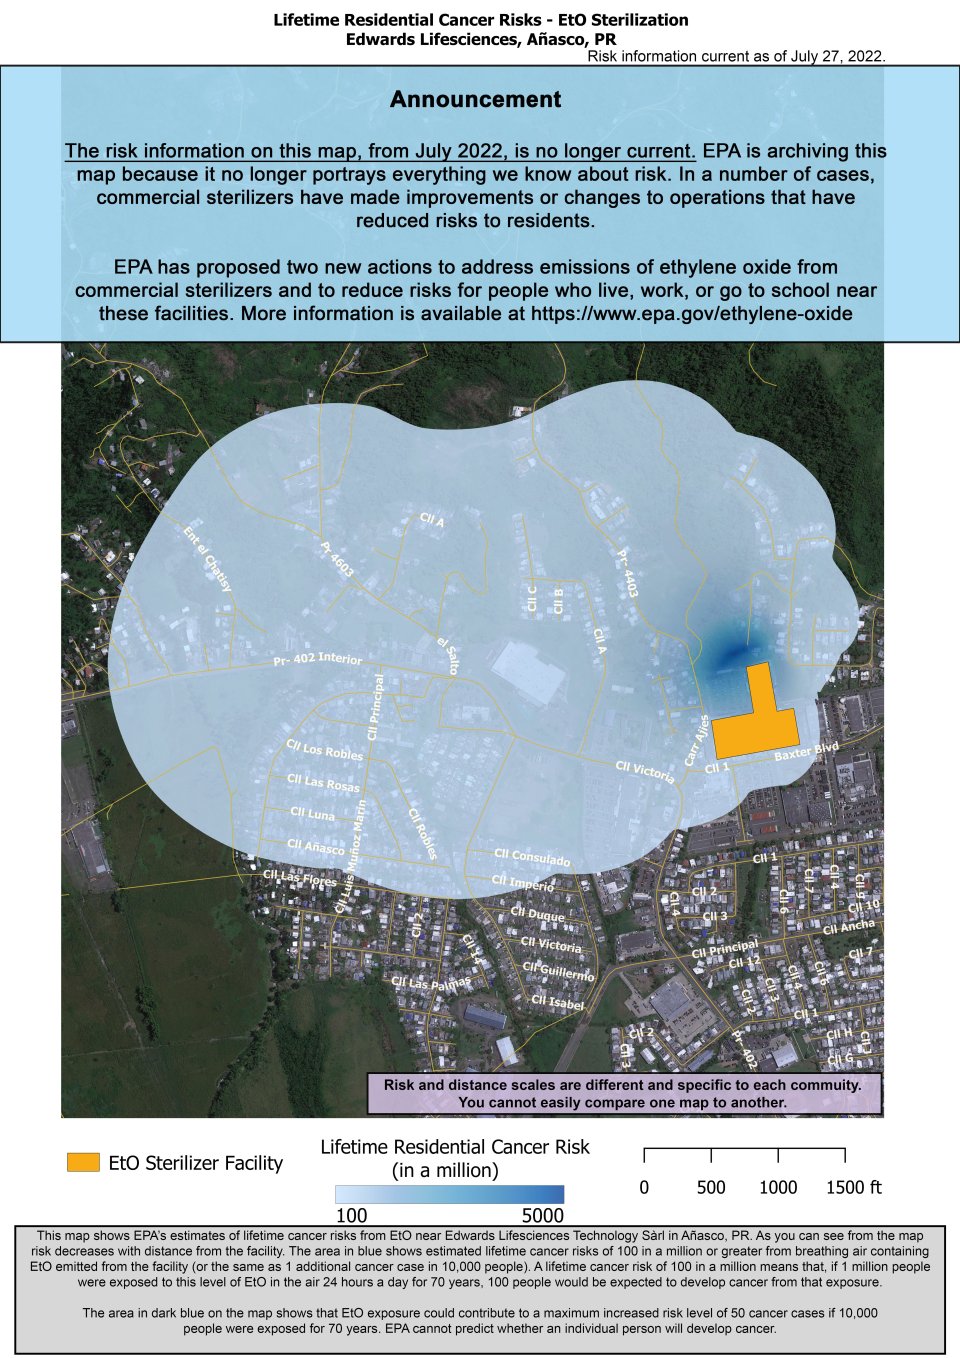 This map shows EPA’s estimate of lifetime cancer risks from breathing ethylene oxide near Edwards Lifesciences located at Parque Industrial Carr. PR-402, Km. 1.4 N, Añasco, PR.  Estimated cancer risk decreases with distance from the facility.  Nearest the facility, the estimated lifetime cancer risk is 5,000 in a million. This drops to 100 in a million and extends near Road PR-402 Km. 2.9 to the west, PR-4403 to the north, Valle Real Residential Development to the southwest.